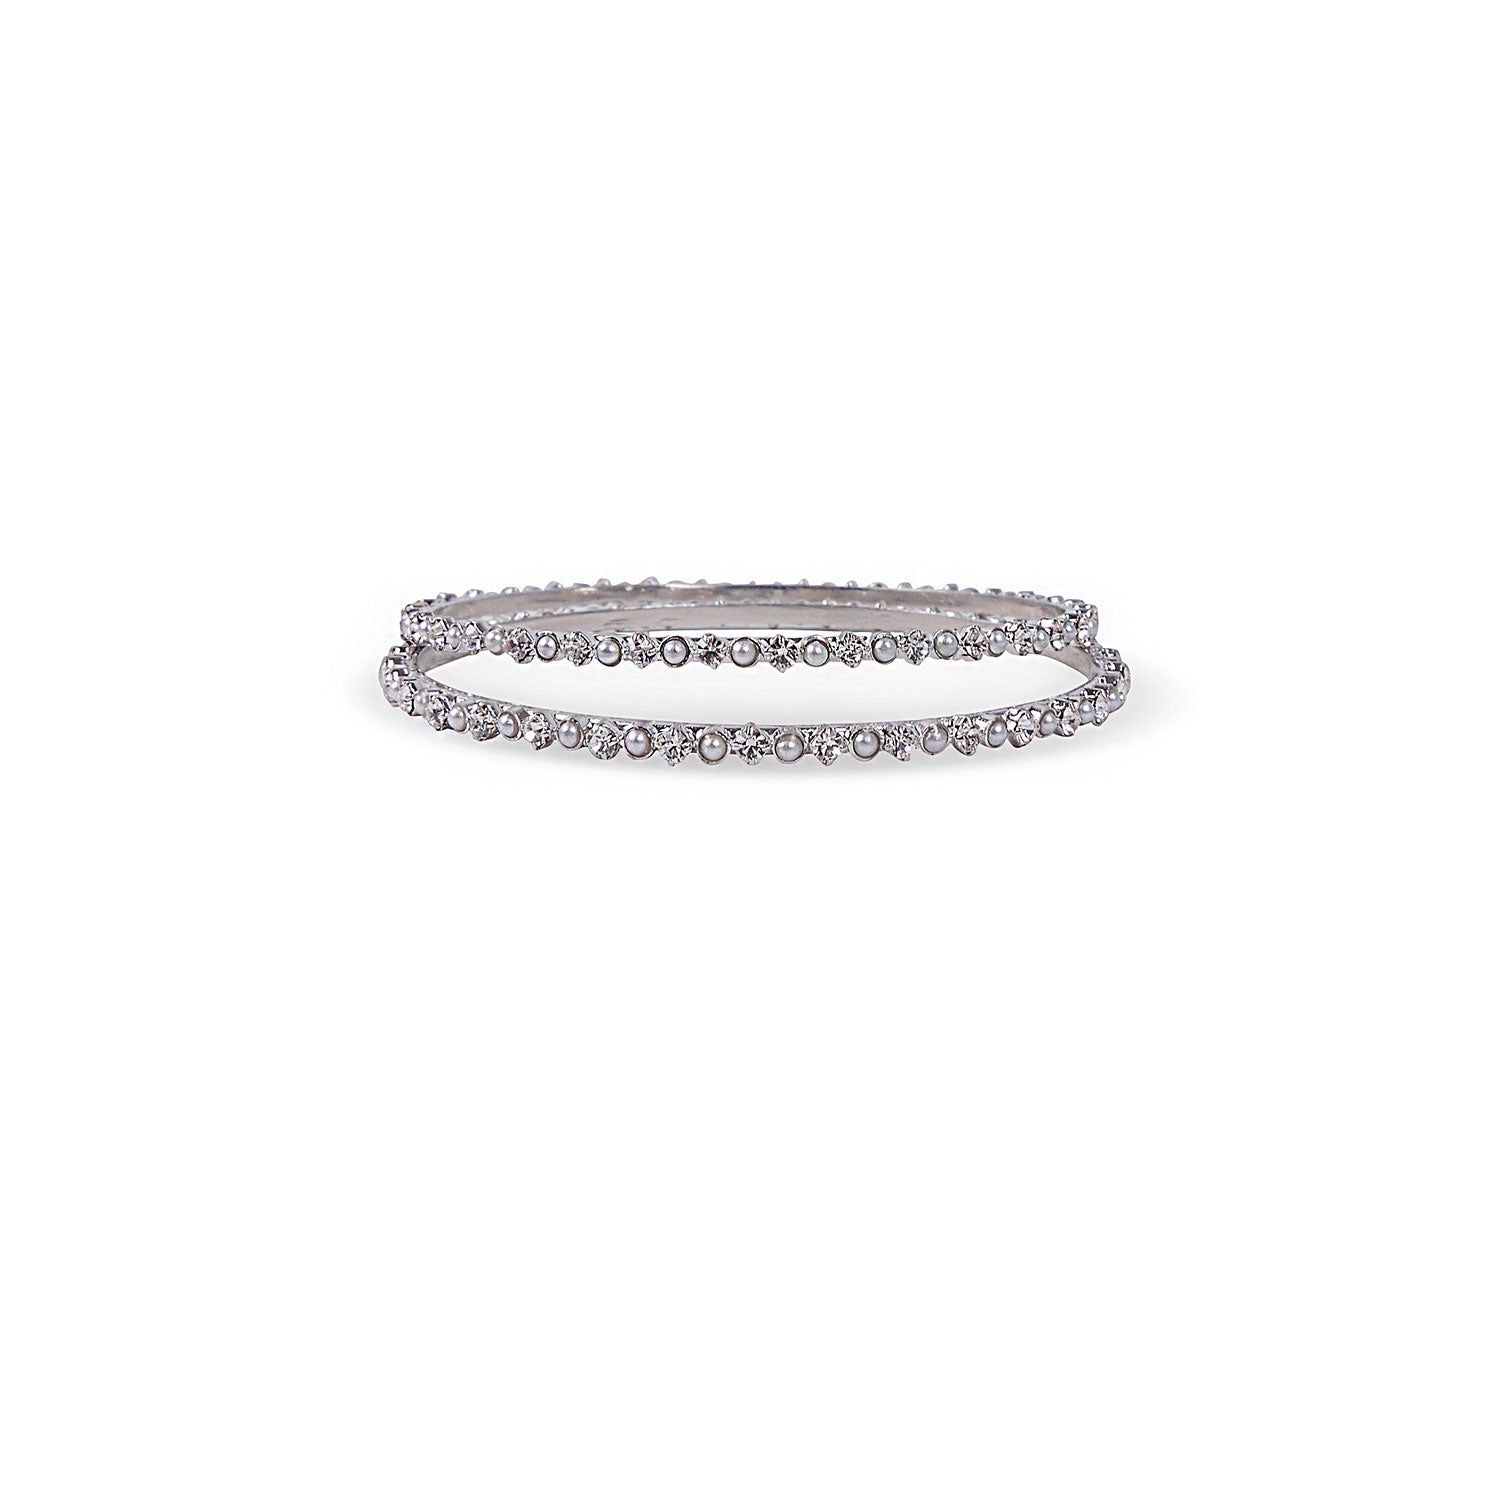 Thin Pearl and White Bangles in Rhodium